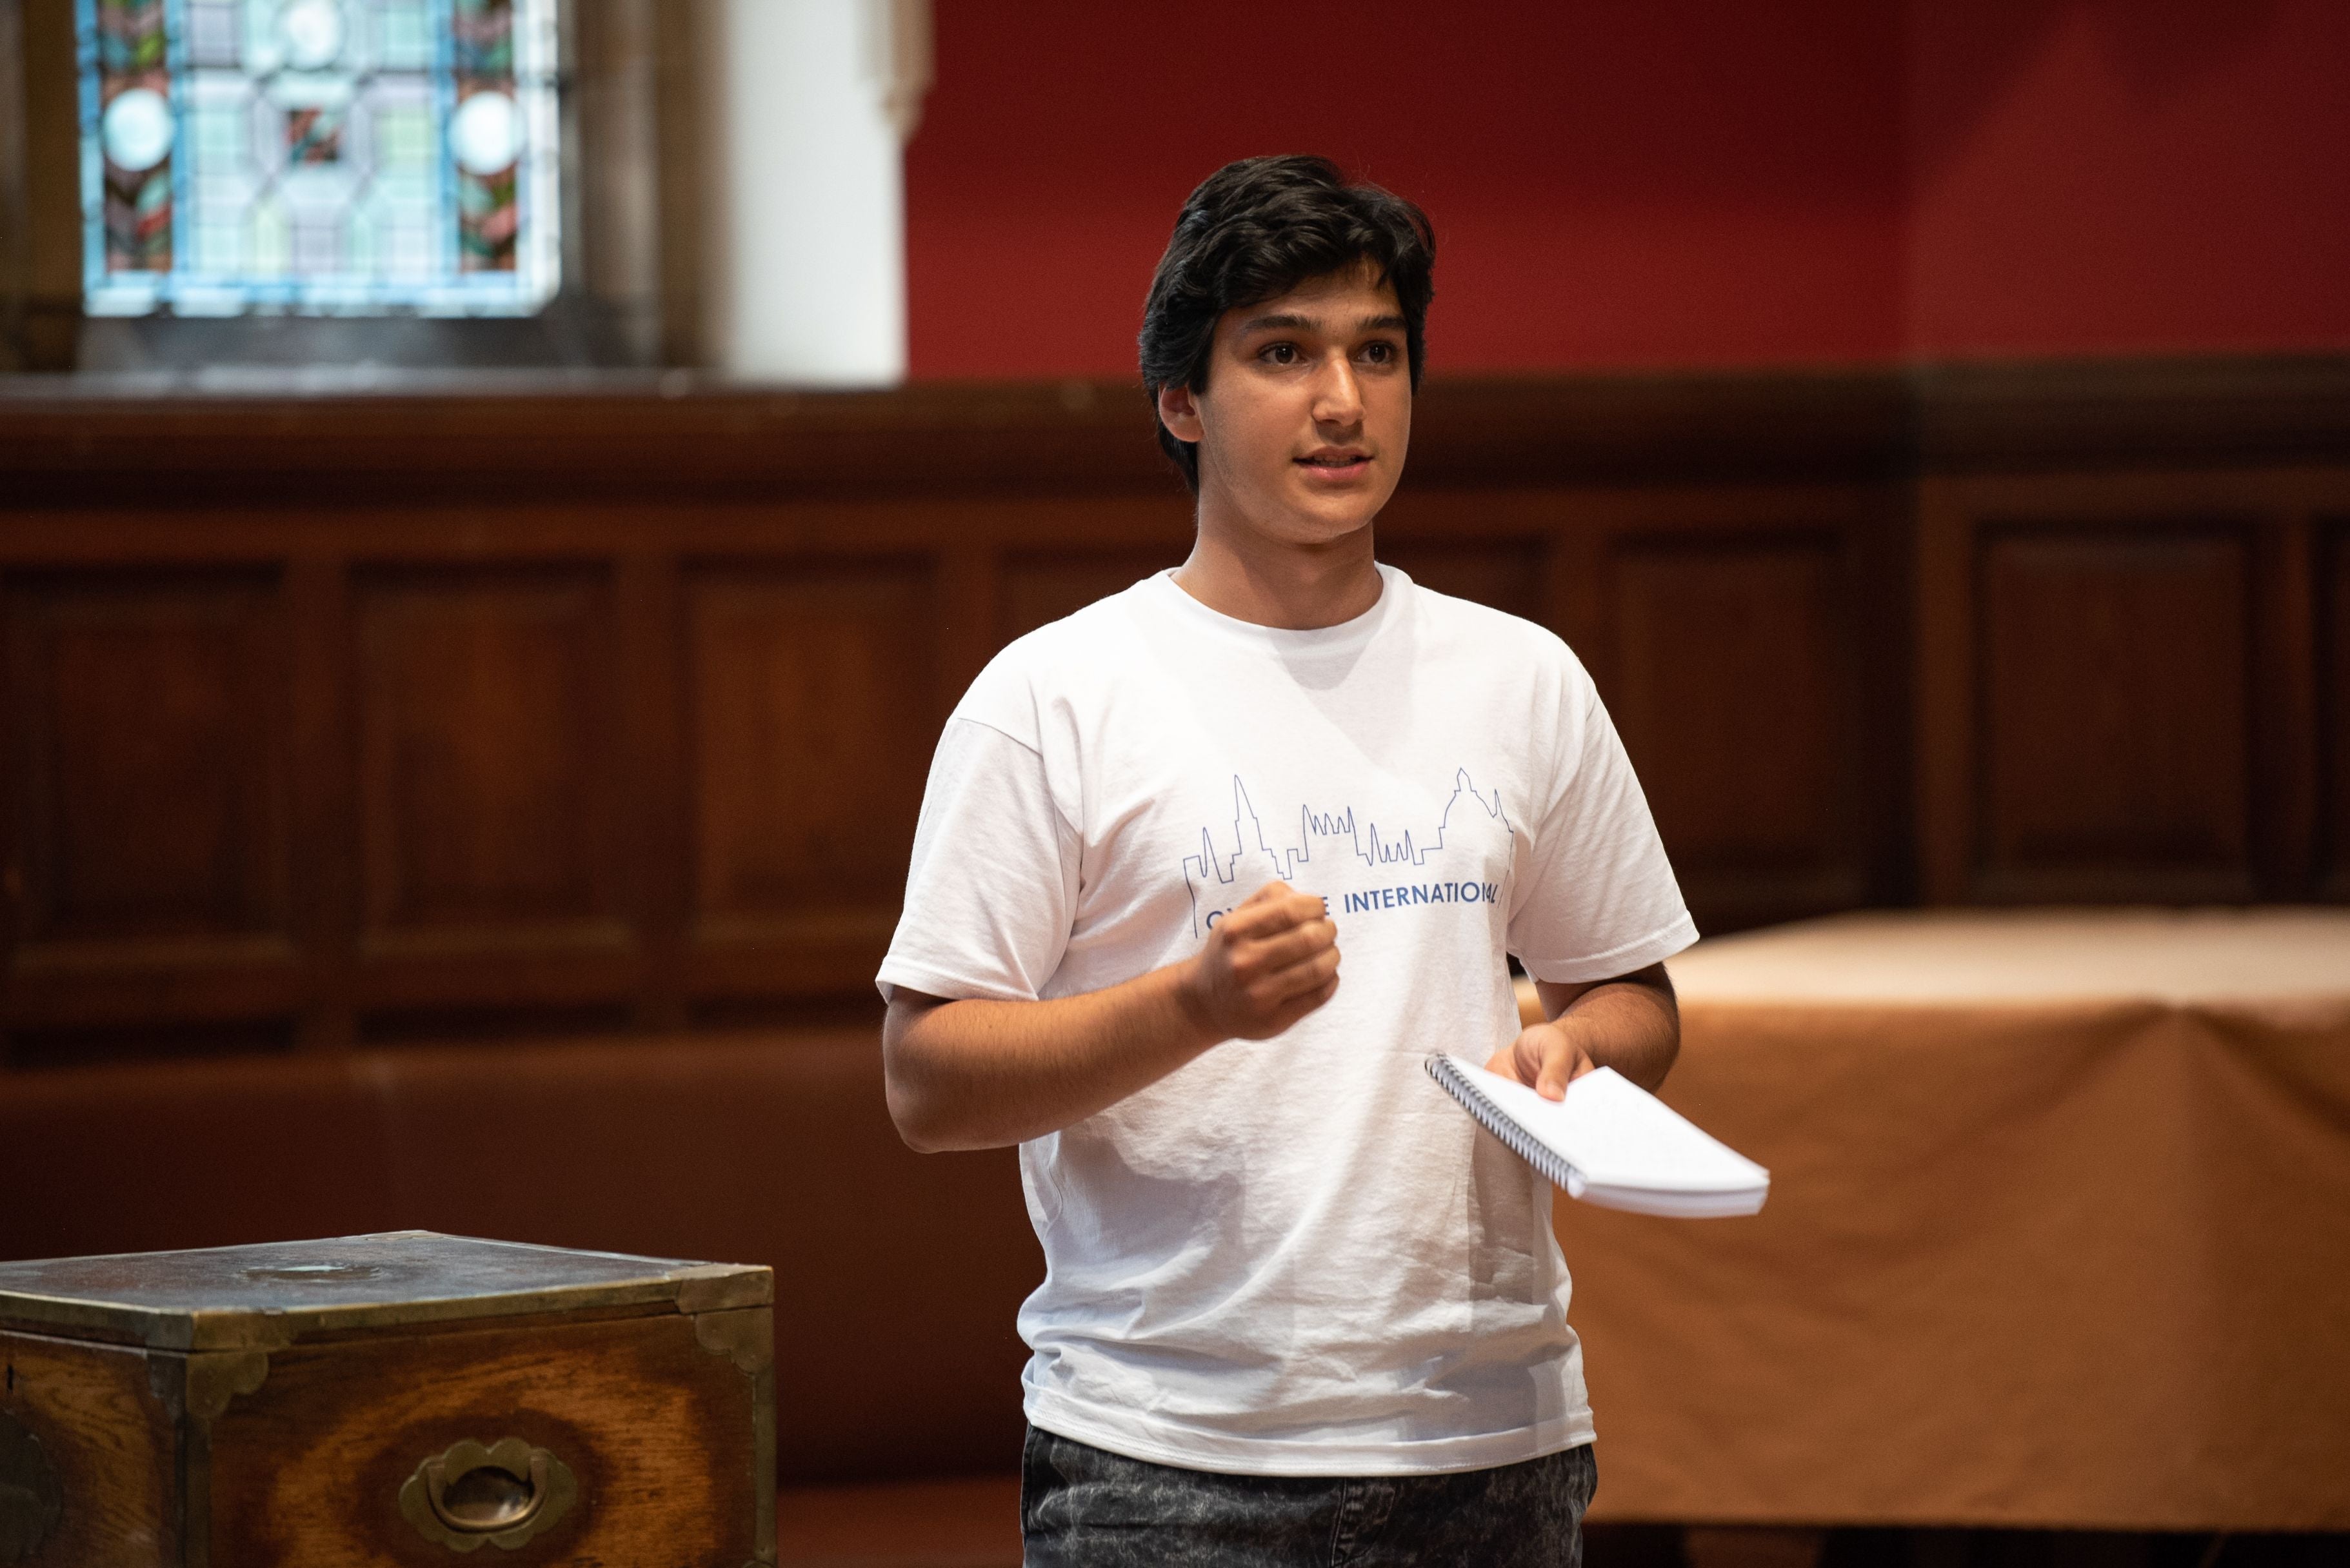 A summer school student debating at the famous Oxford Union